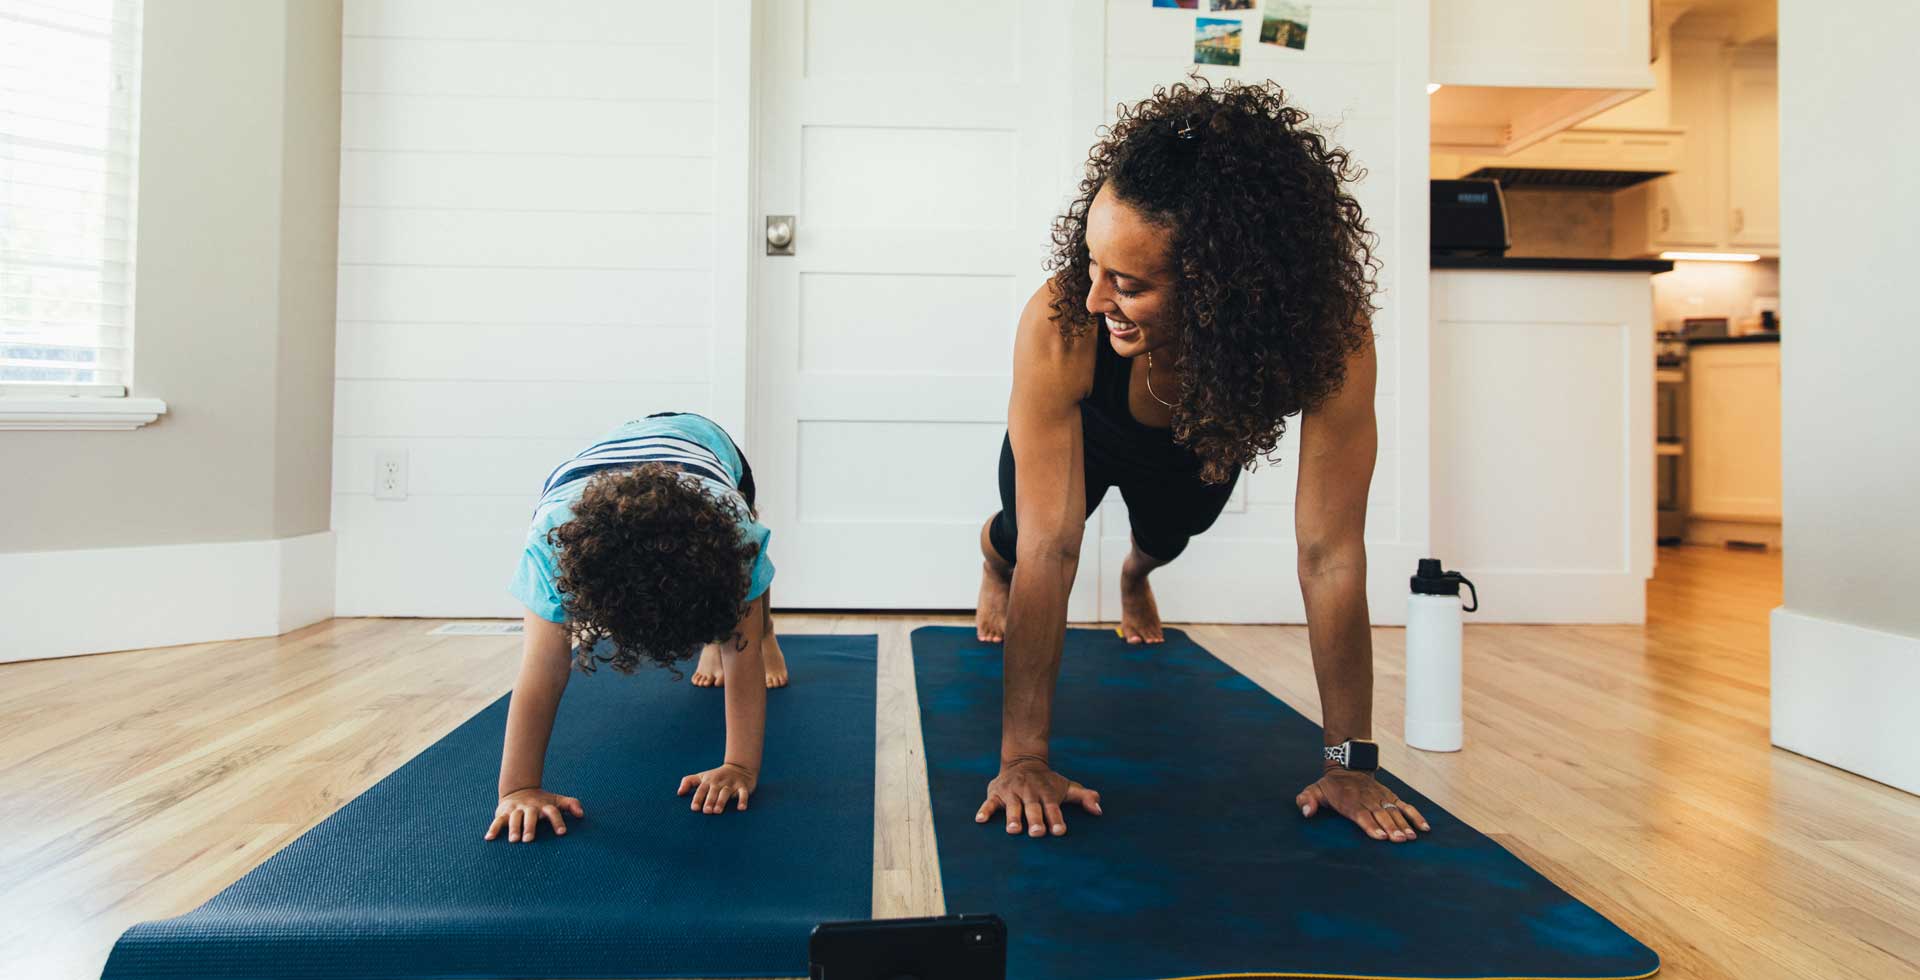 A mother and her young child do yoga together